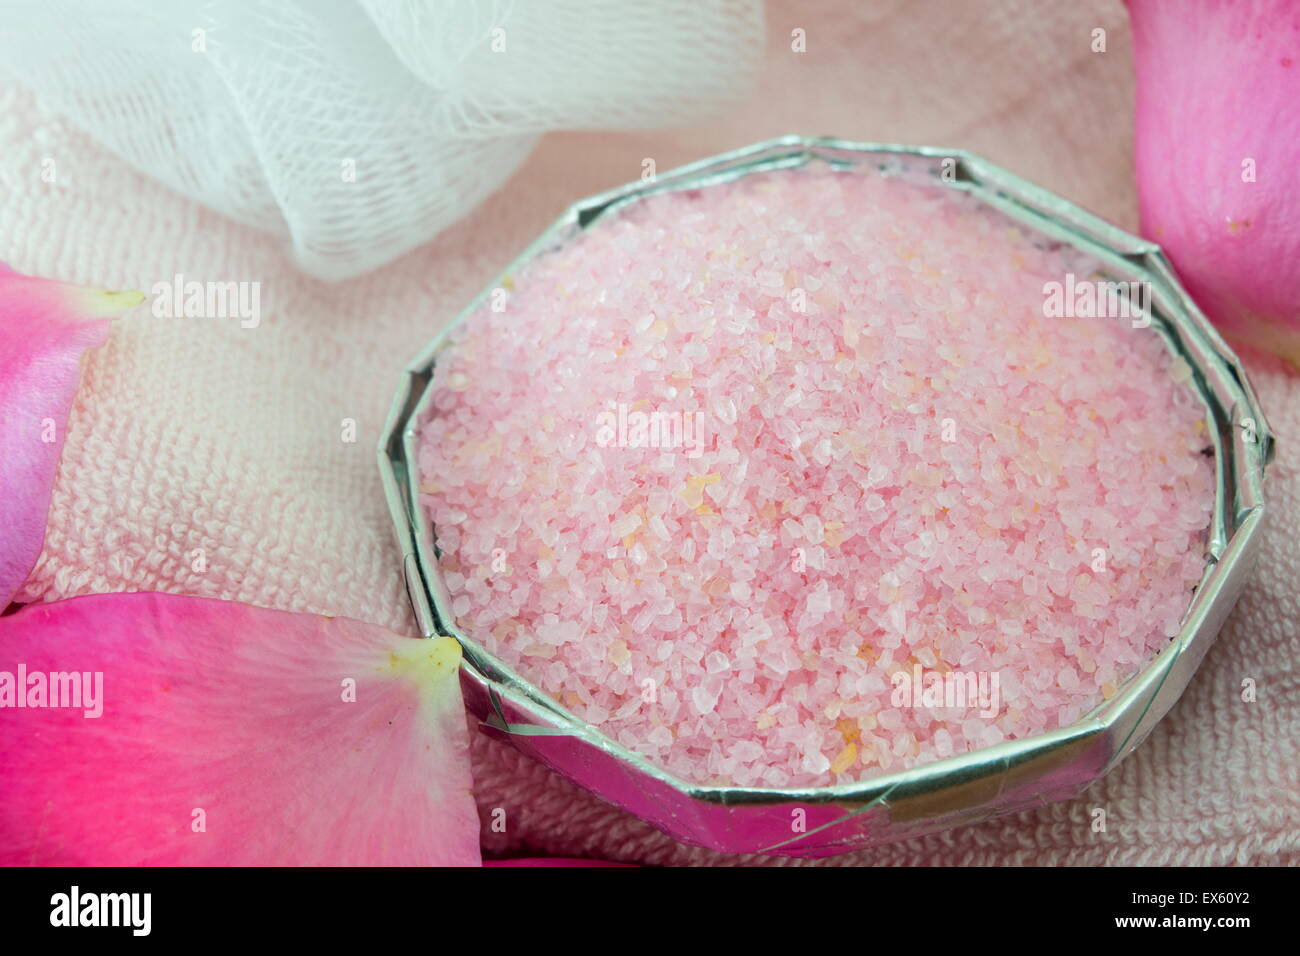 Pink aromatic bath salt on a table decorated with rose petals Stock Photo